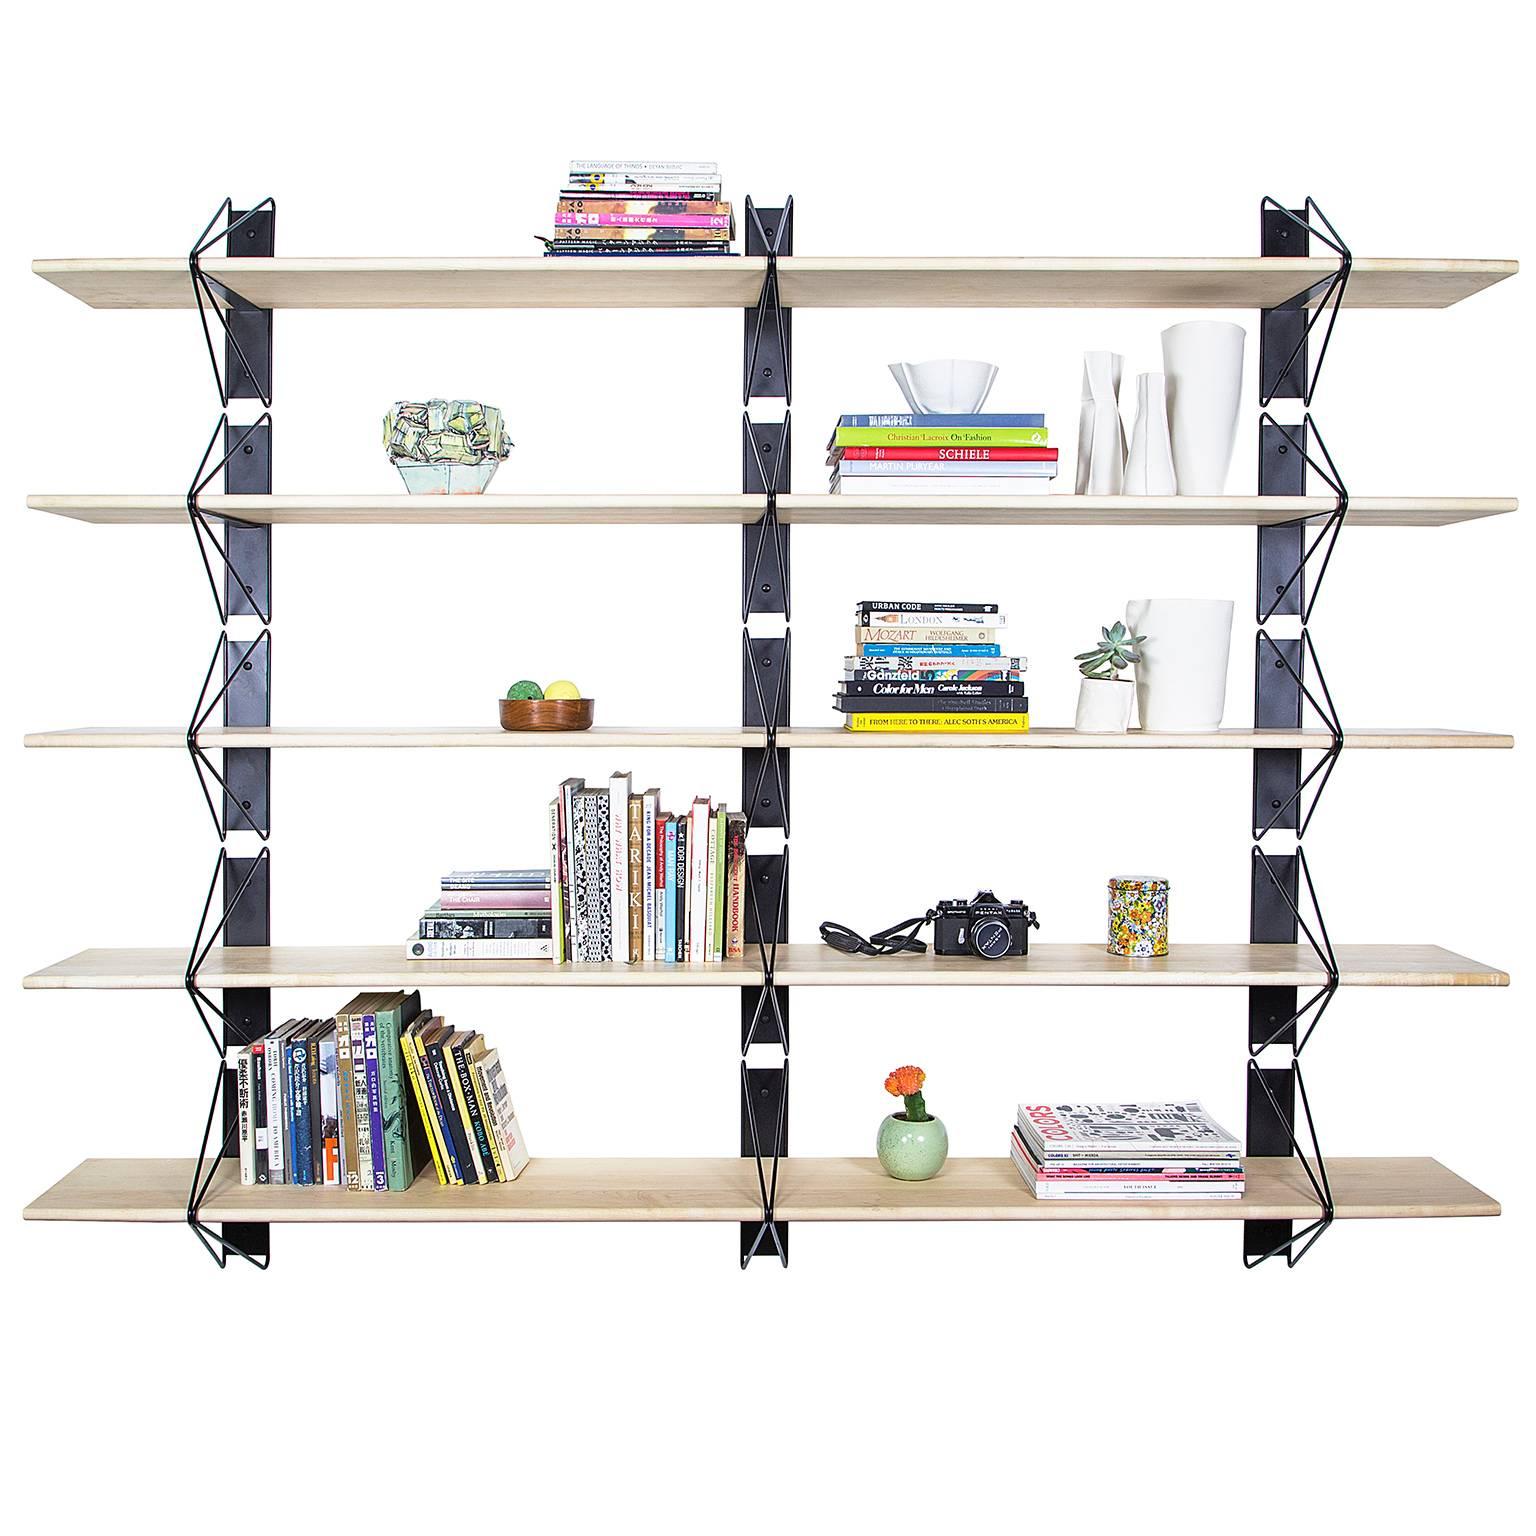 Powder-Coated Set of 3 Strut Shelves from Souda, Black and Maple, Made to Order For Sale